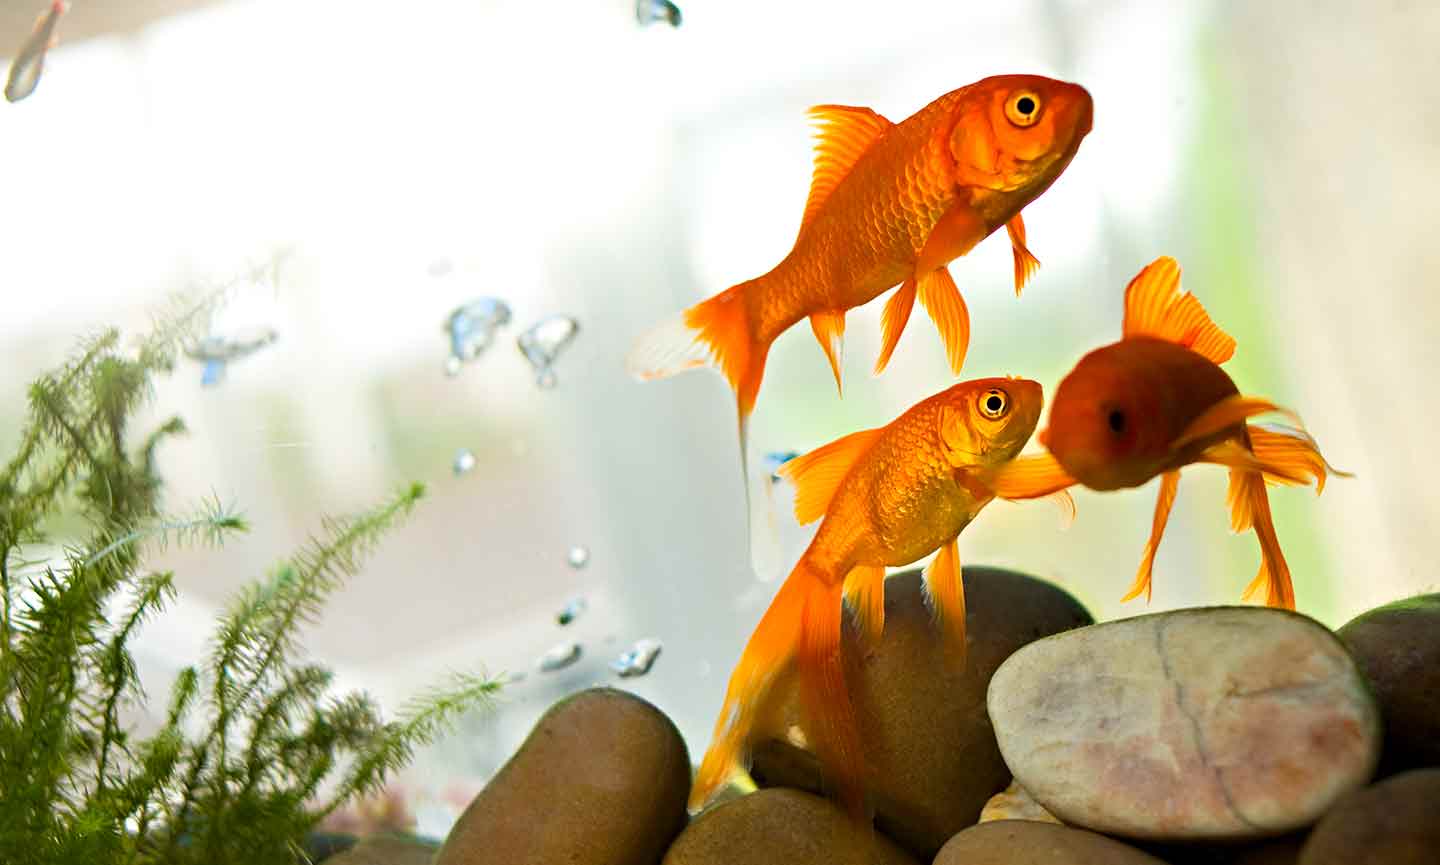 20 Common Fish Diseases and Their Symptoms